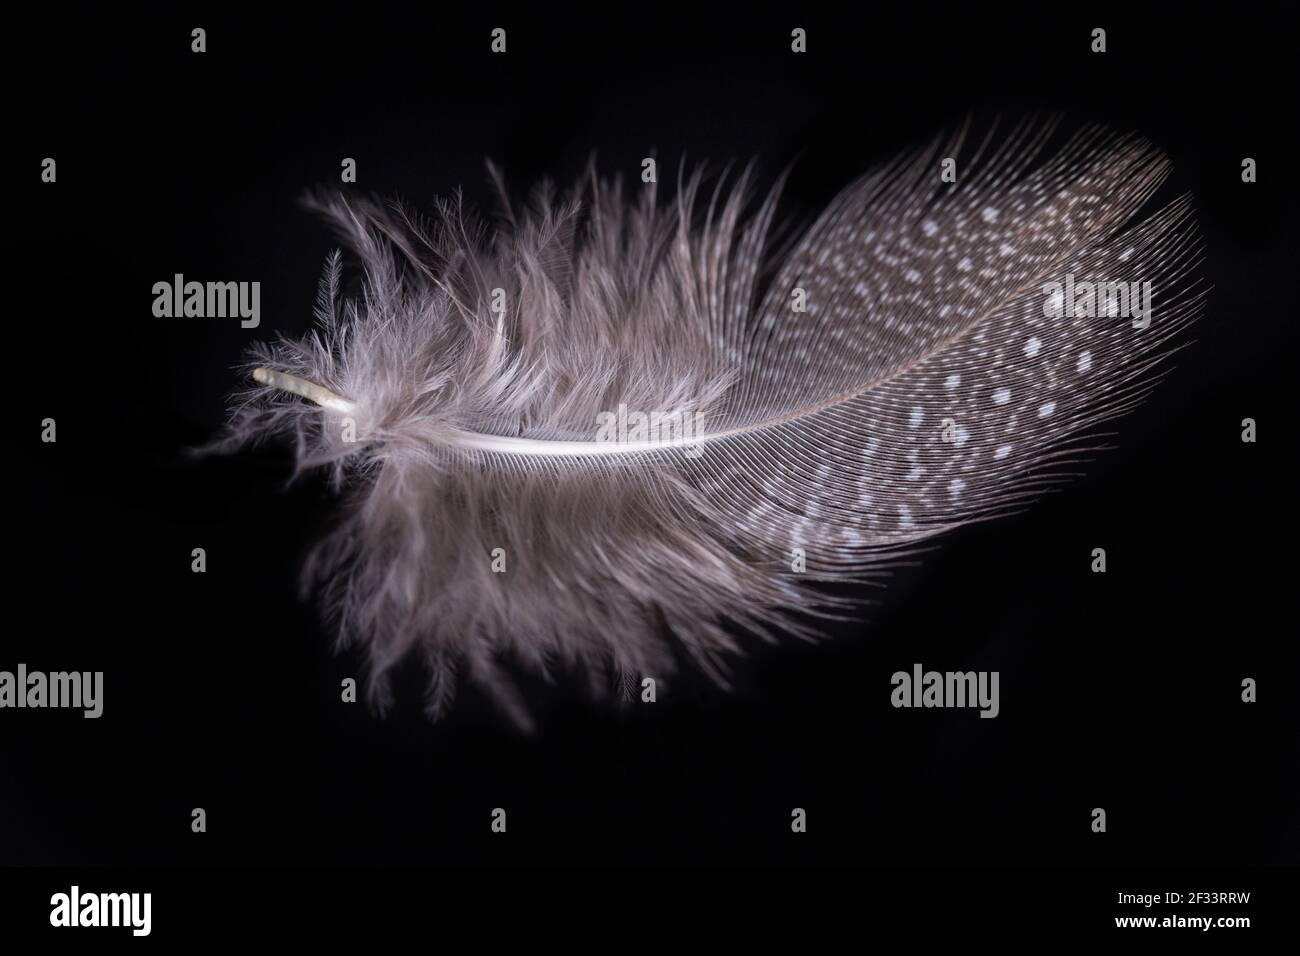 Beautiful flying delicate feathers on a black background, creative layout, soft white feathers floating in the air. Stock Photo